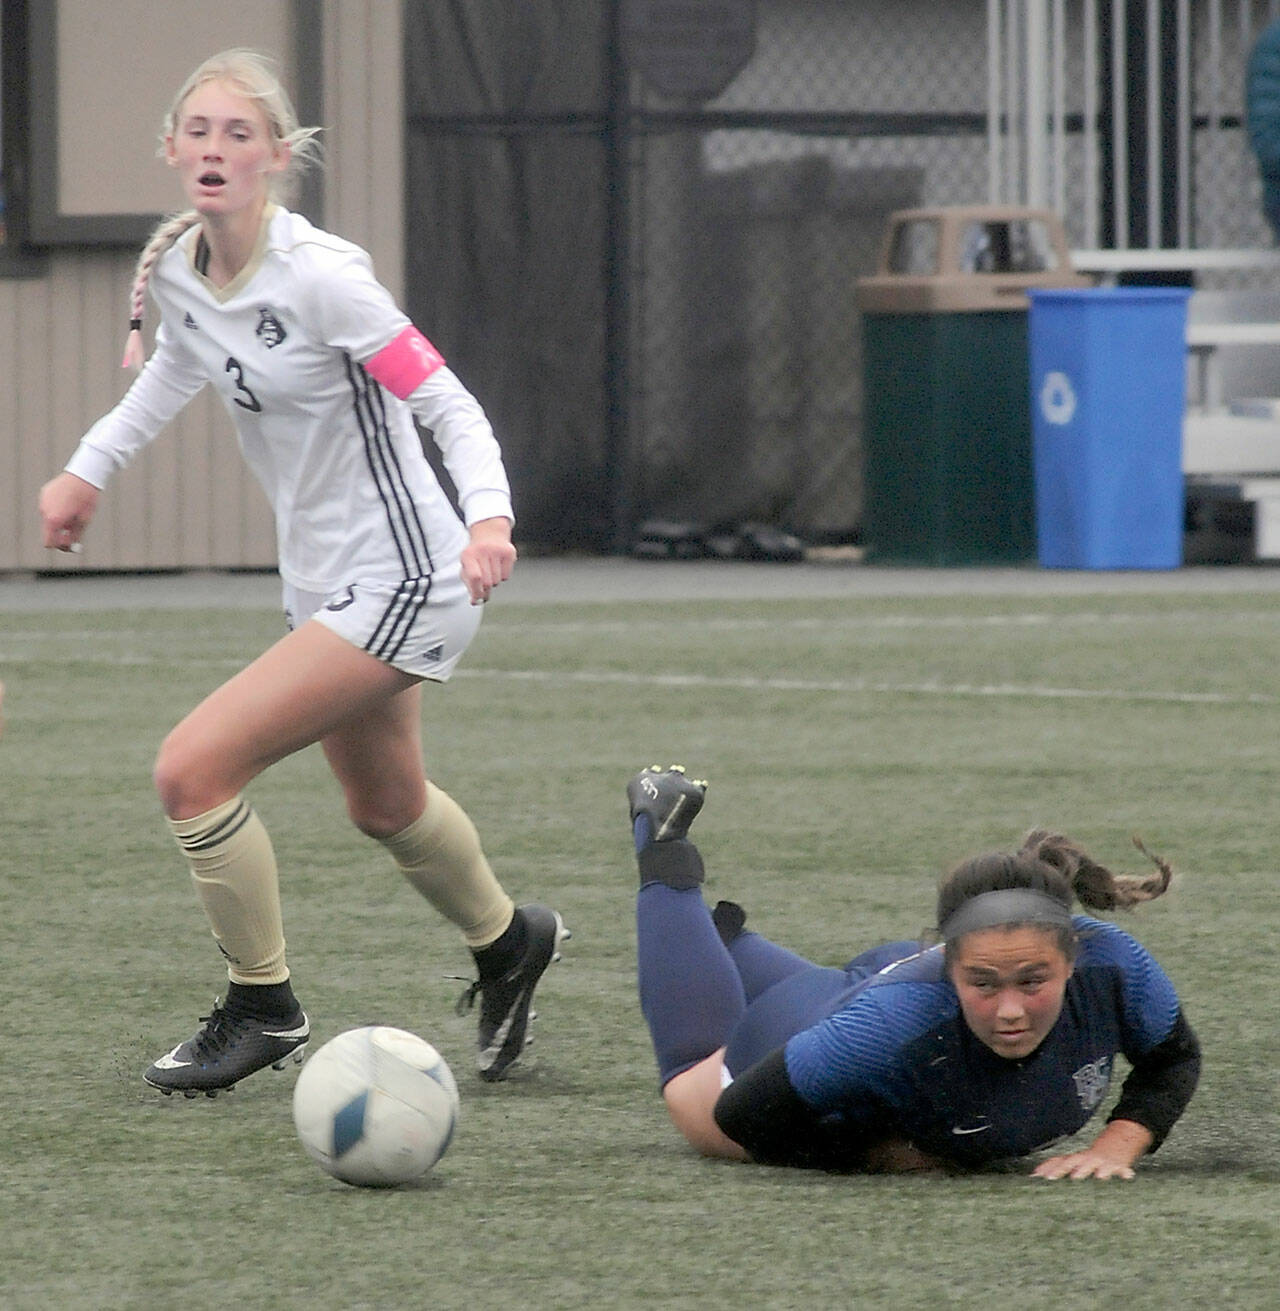 KEITH THORPE/PENINSULA DAILY NEWS
Peninsula's Millie Long, left, watches as Bellevue's Peyton Pine gets tripped up during the first half of Wednesday's match in Port Angeles.